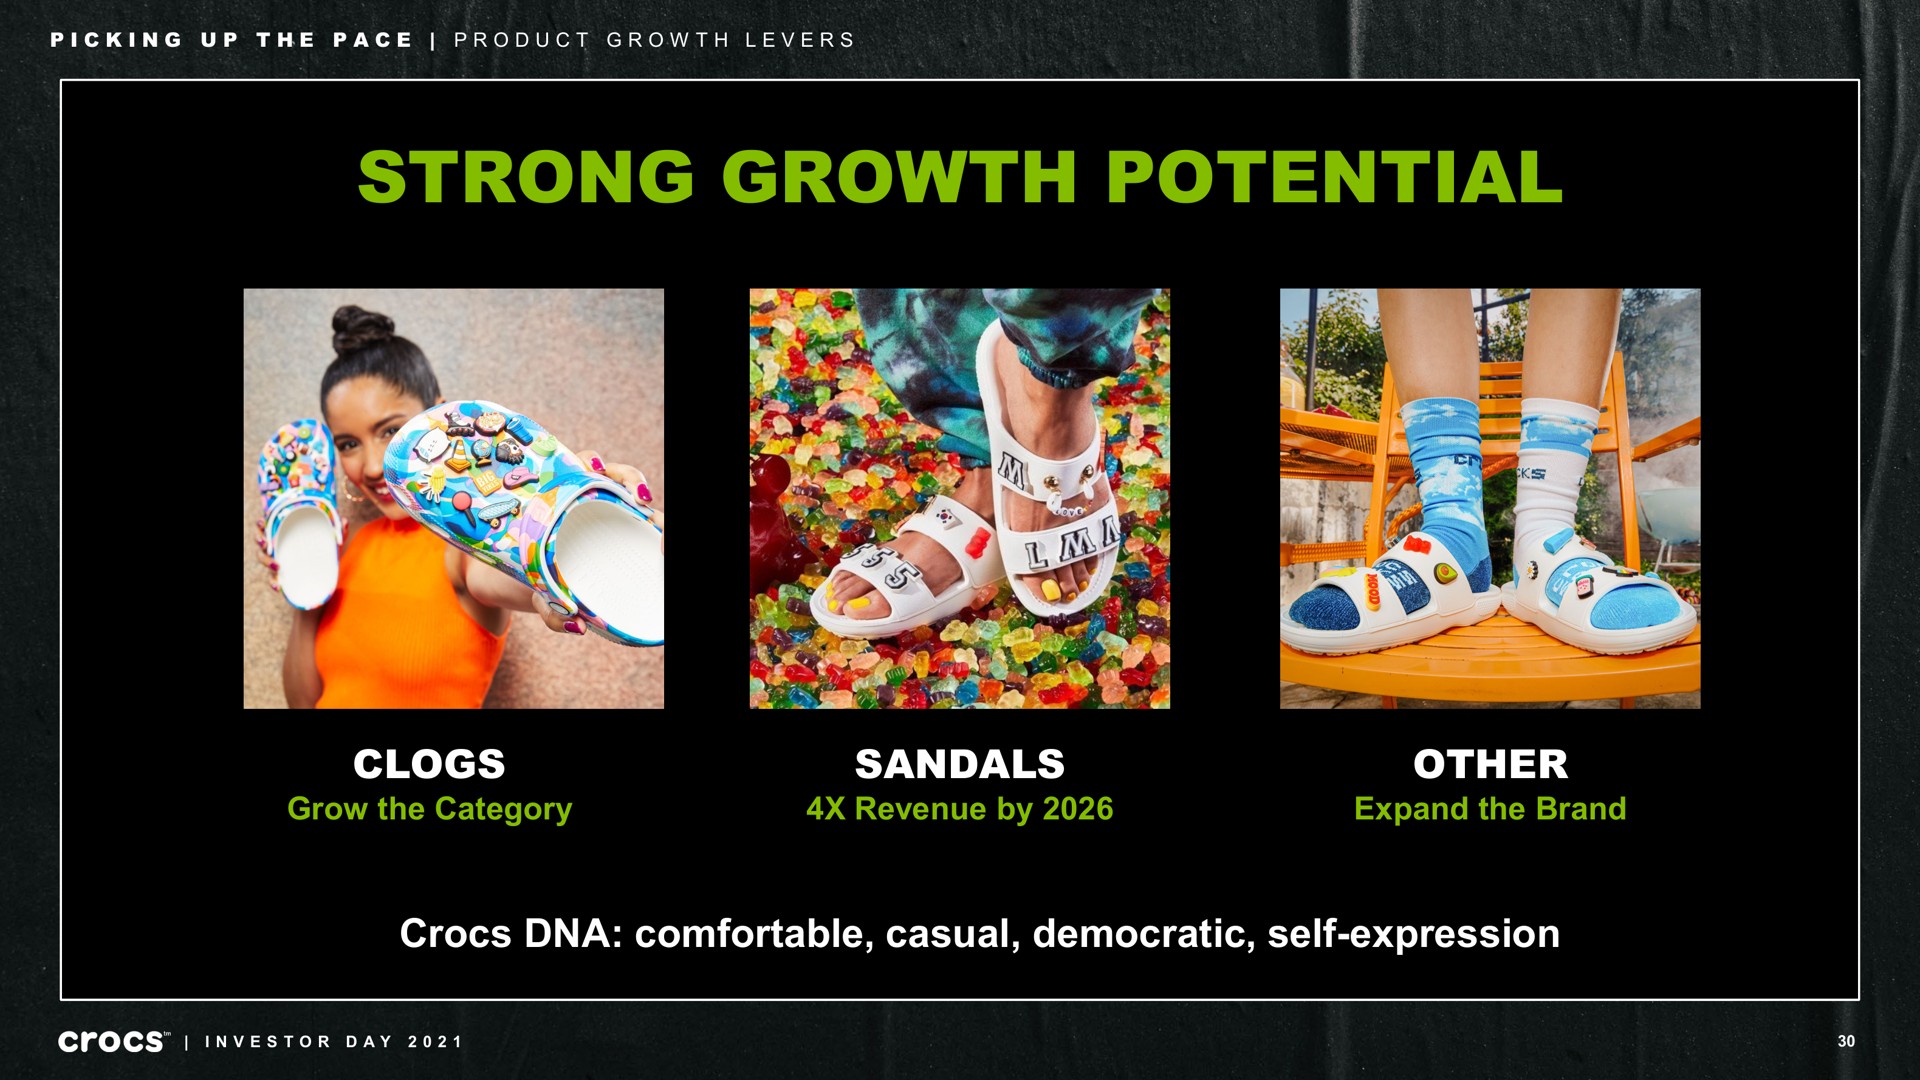 strong growth potential clogs grow the category sandals revenue by other expand the brand comfortable casual democratic self expression picking up pace product levers as investor day | Crocs